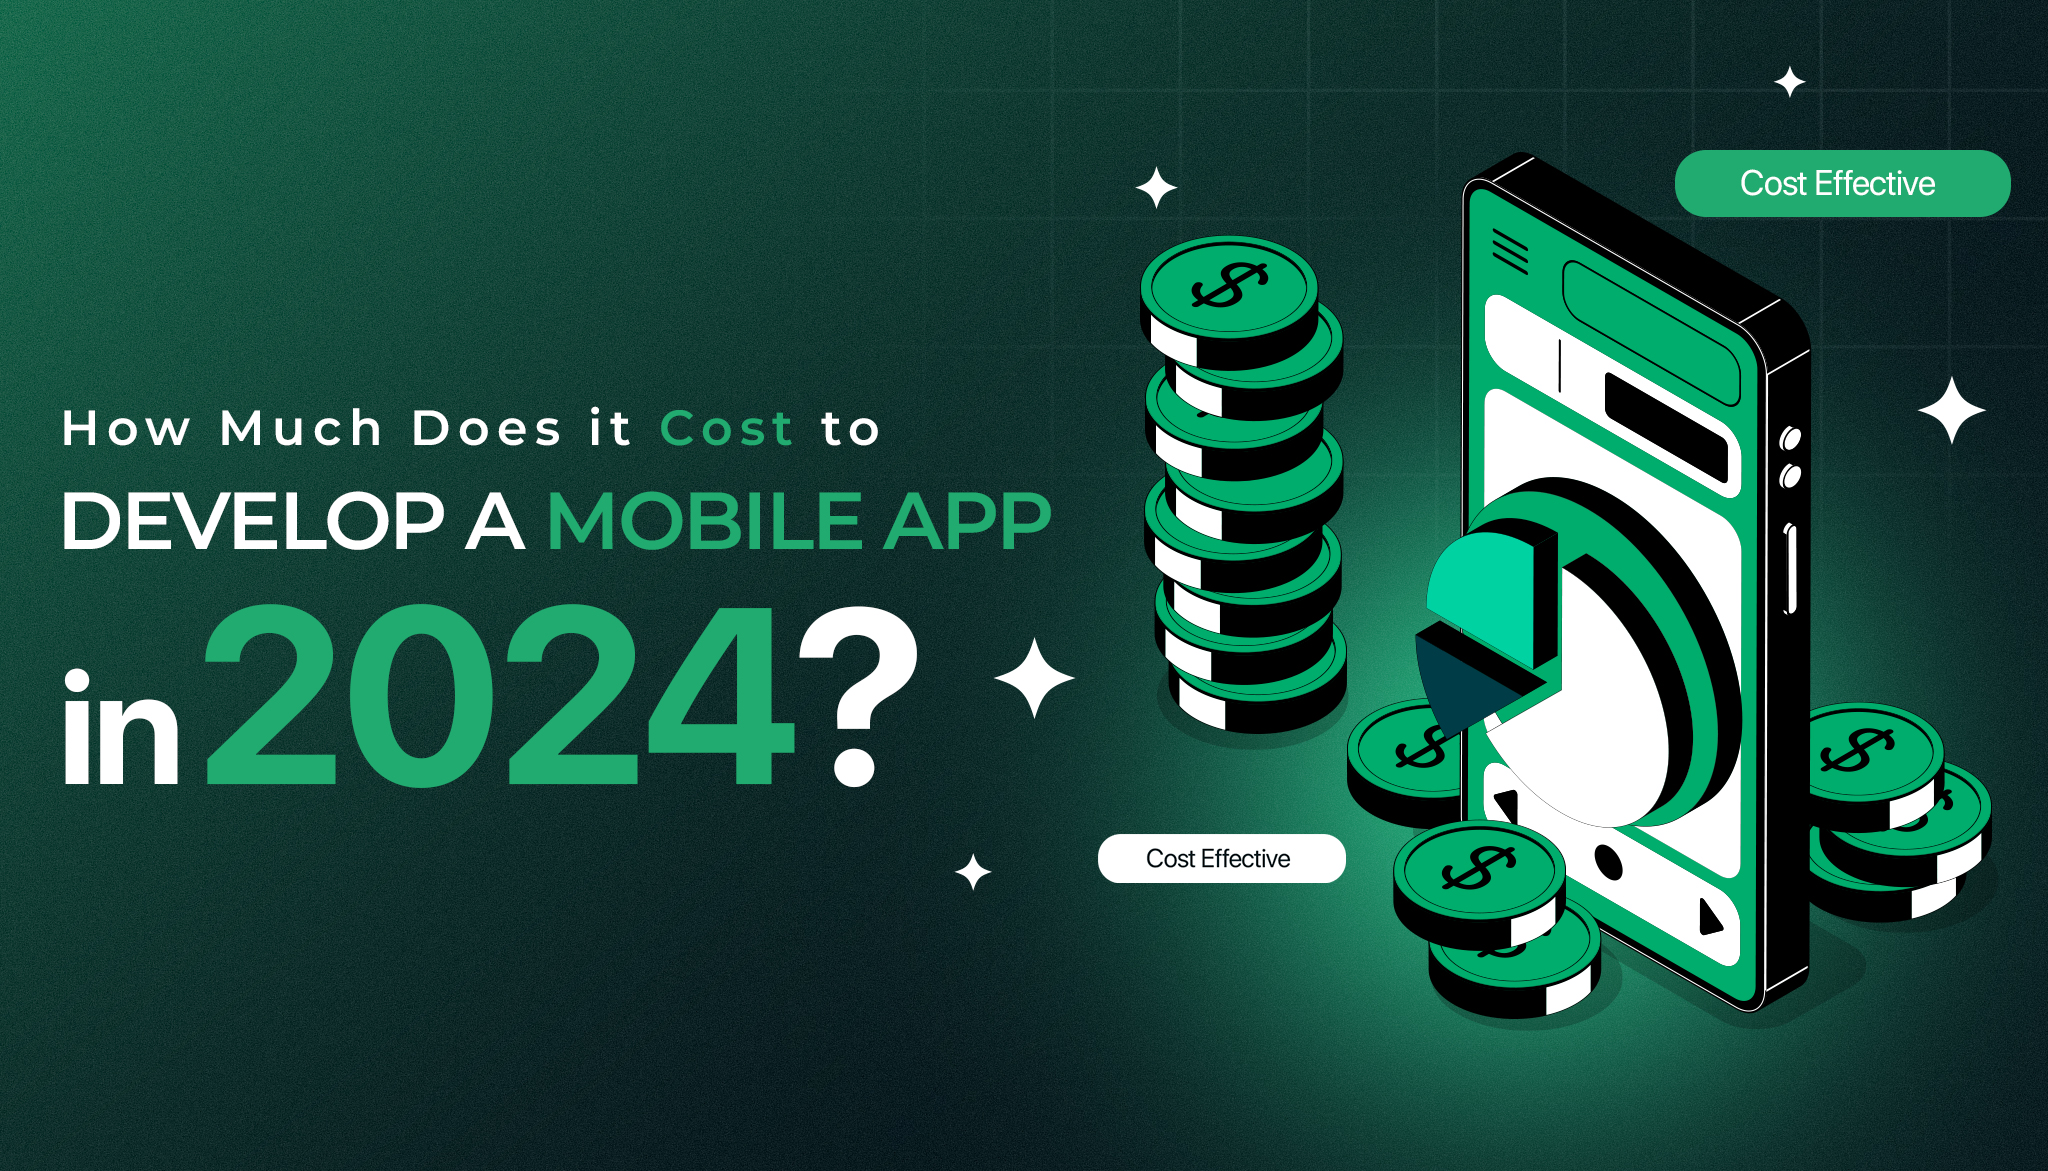 How Much Does it Cost to Develop a Mobile App in 2024